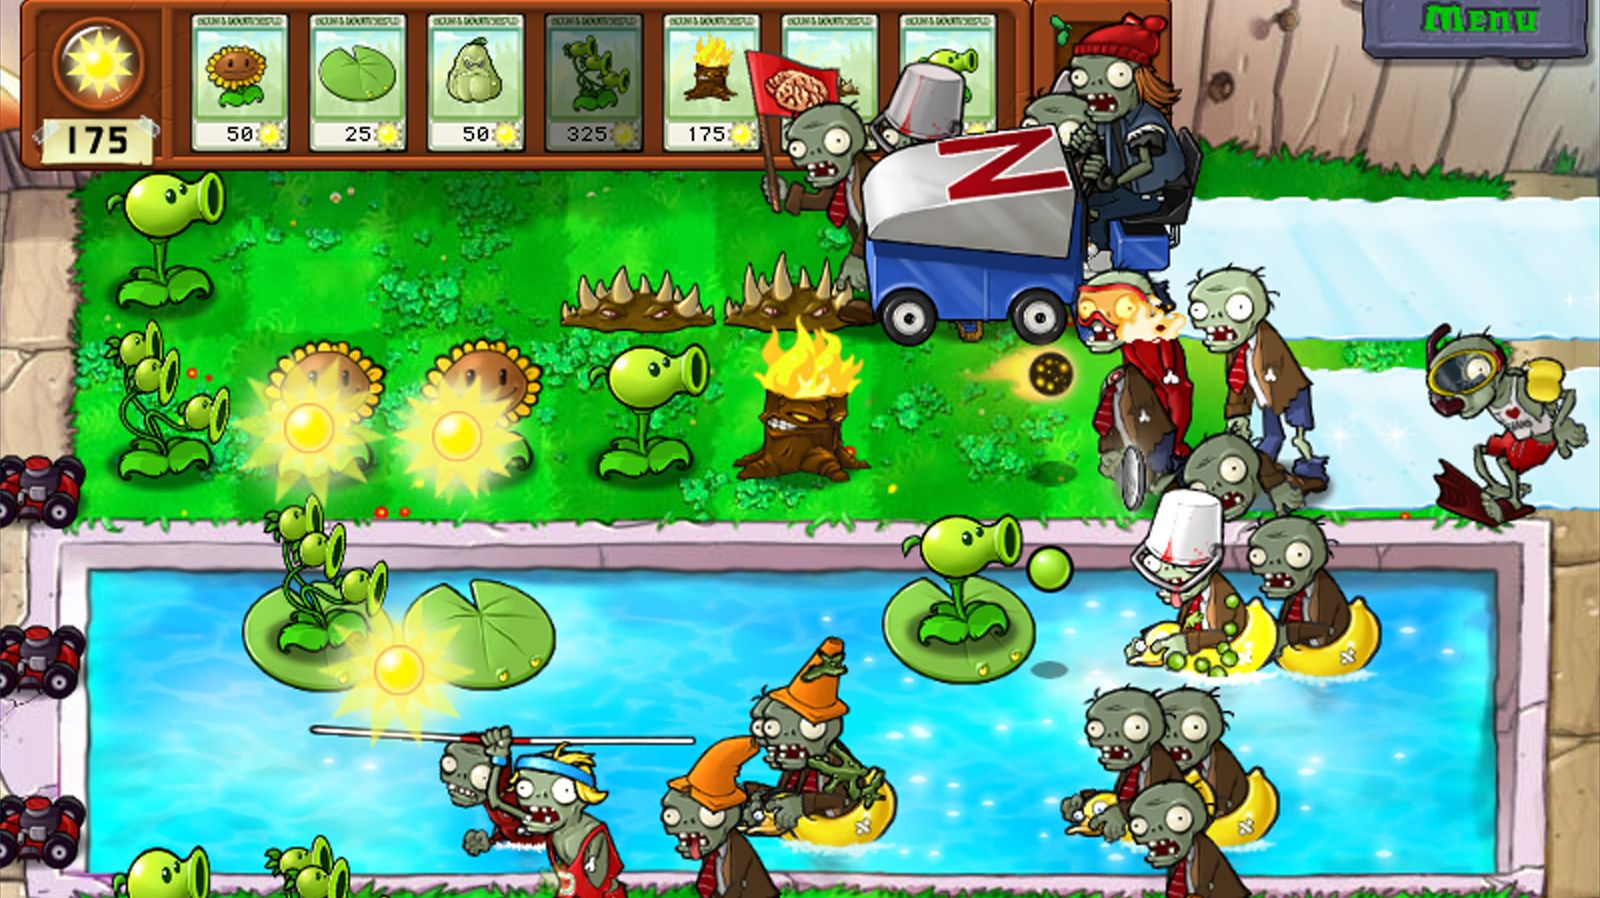 Zombies embarking on their slow, shambling attack in Plants vs. Zombies